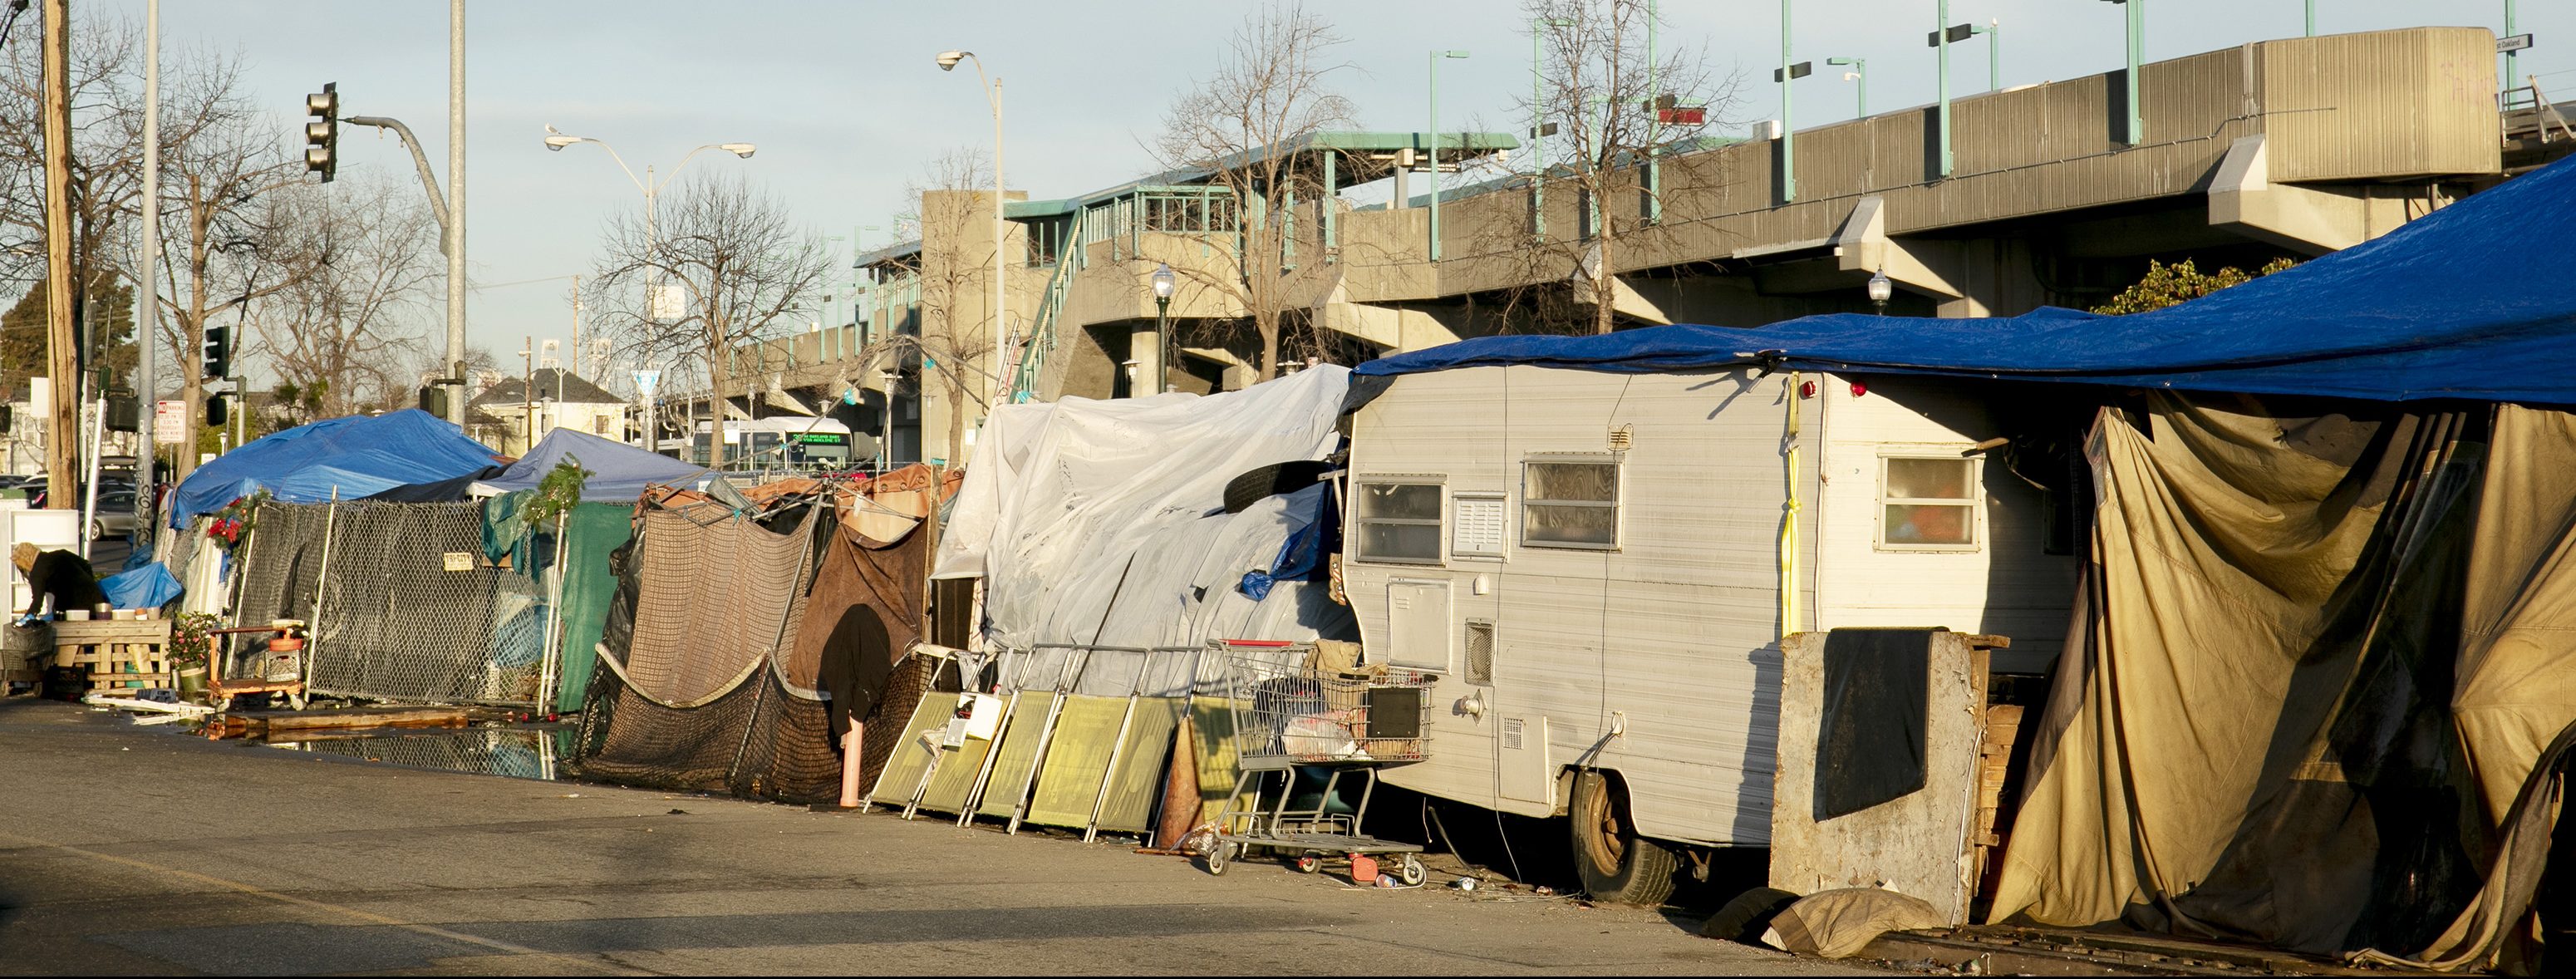 California’s homelessness crisis — and possible solutions — explained